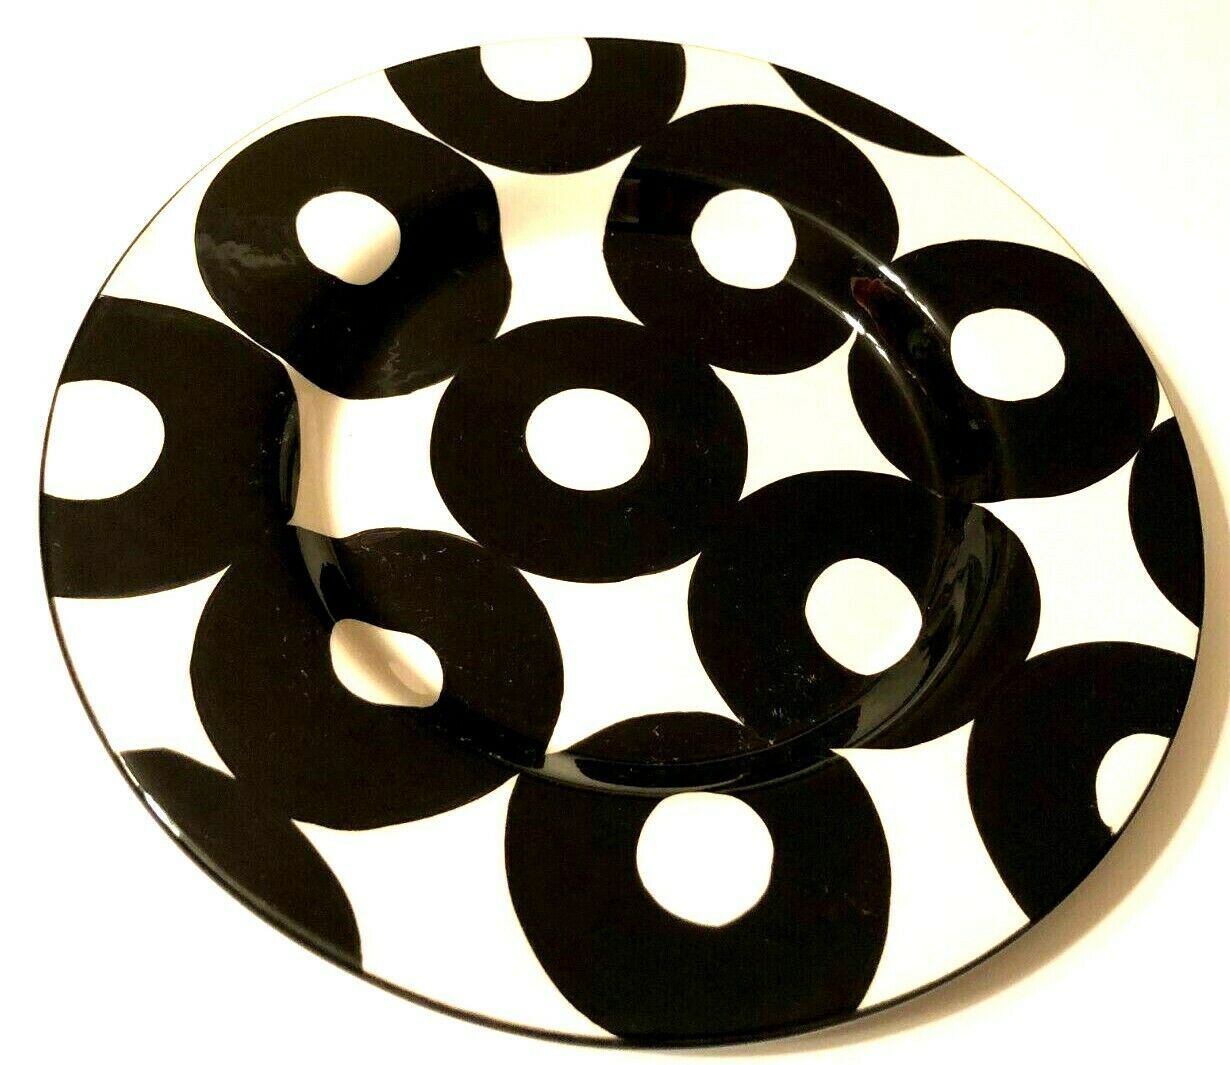 Tabletops Lifestyles Black Geometric Positive Hand Painted Crafted Salad Plate